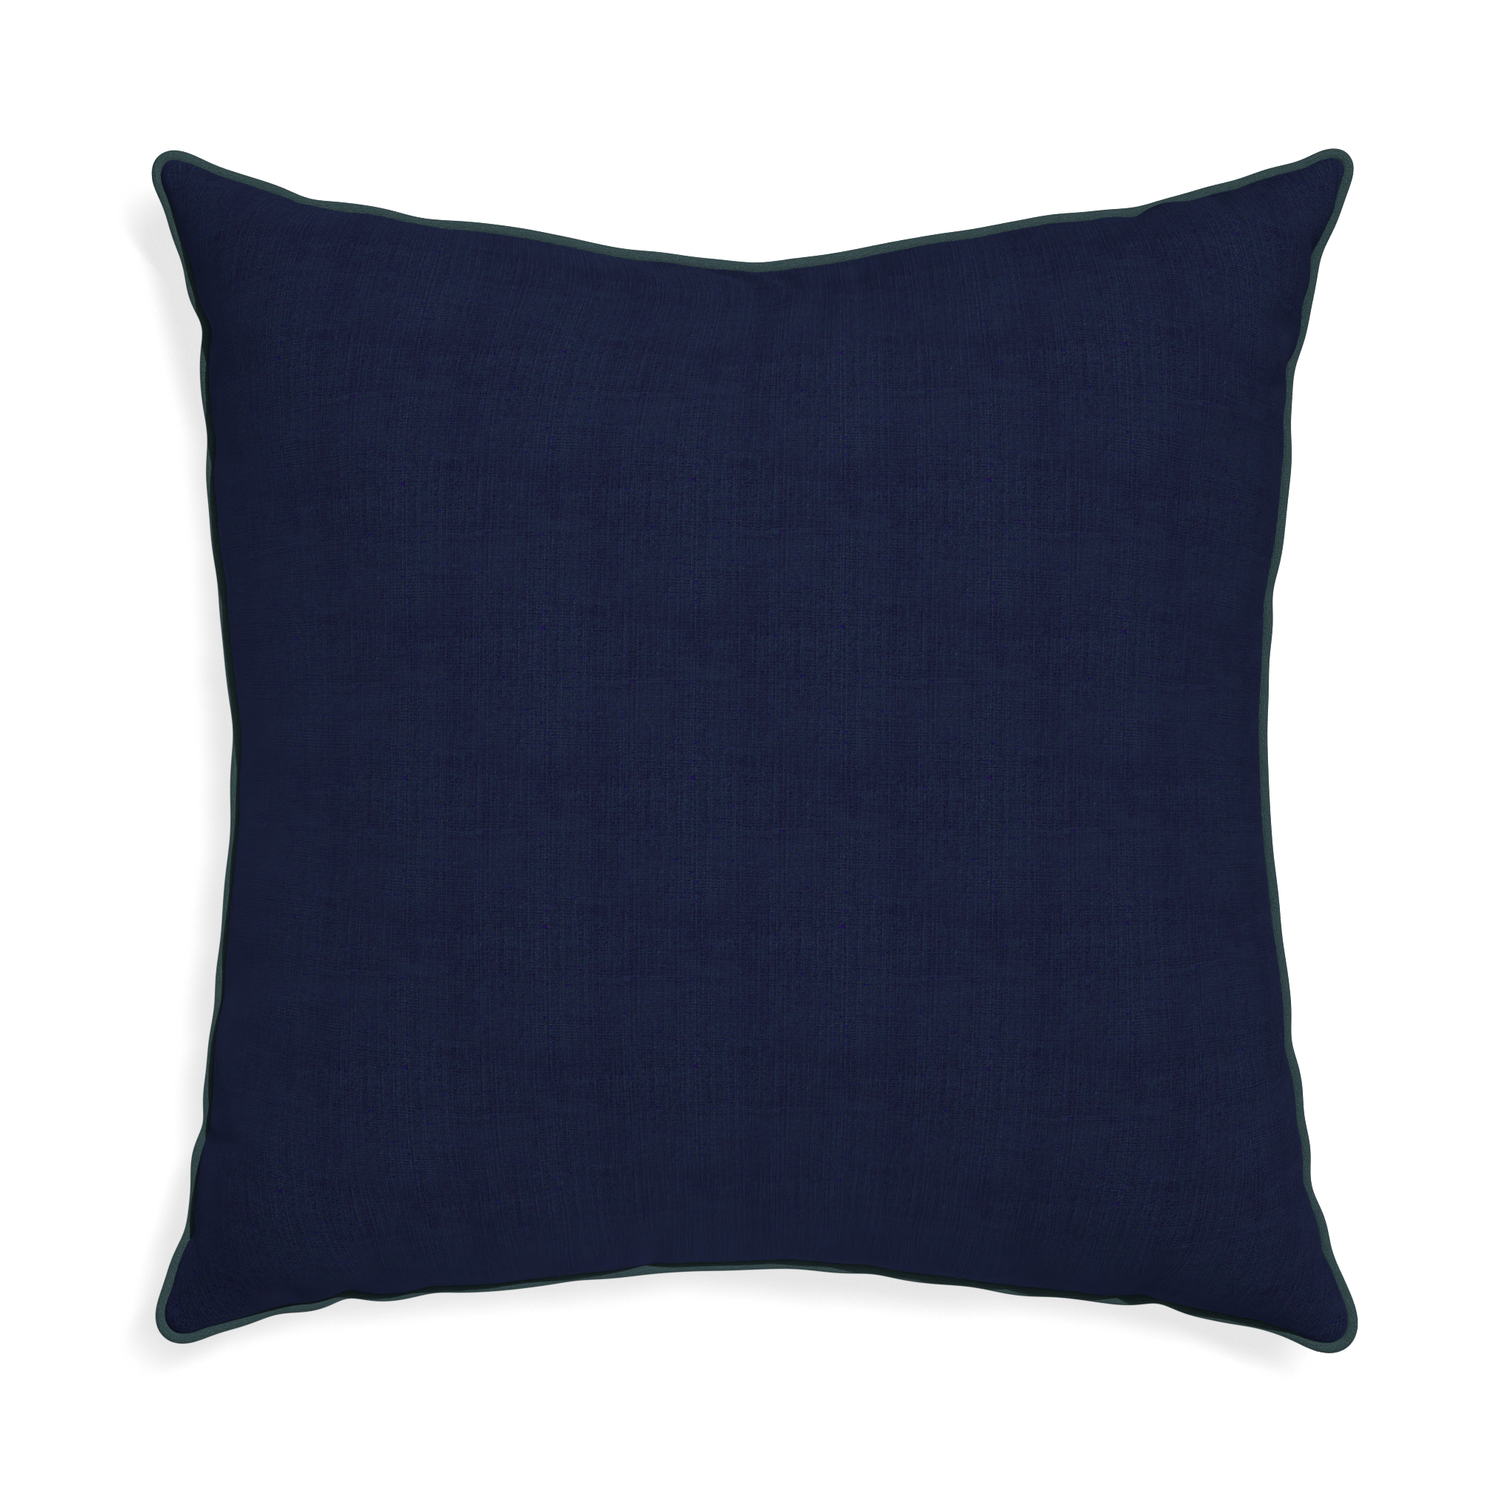 Euro-sham midnight custom navy bluepillow with p piping on white background